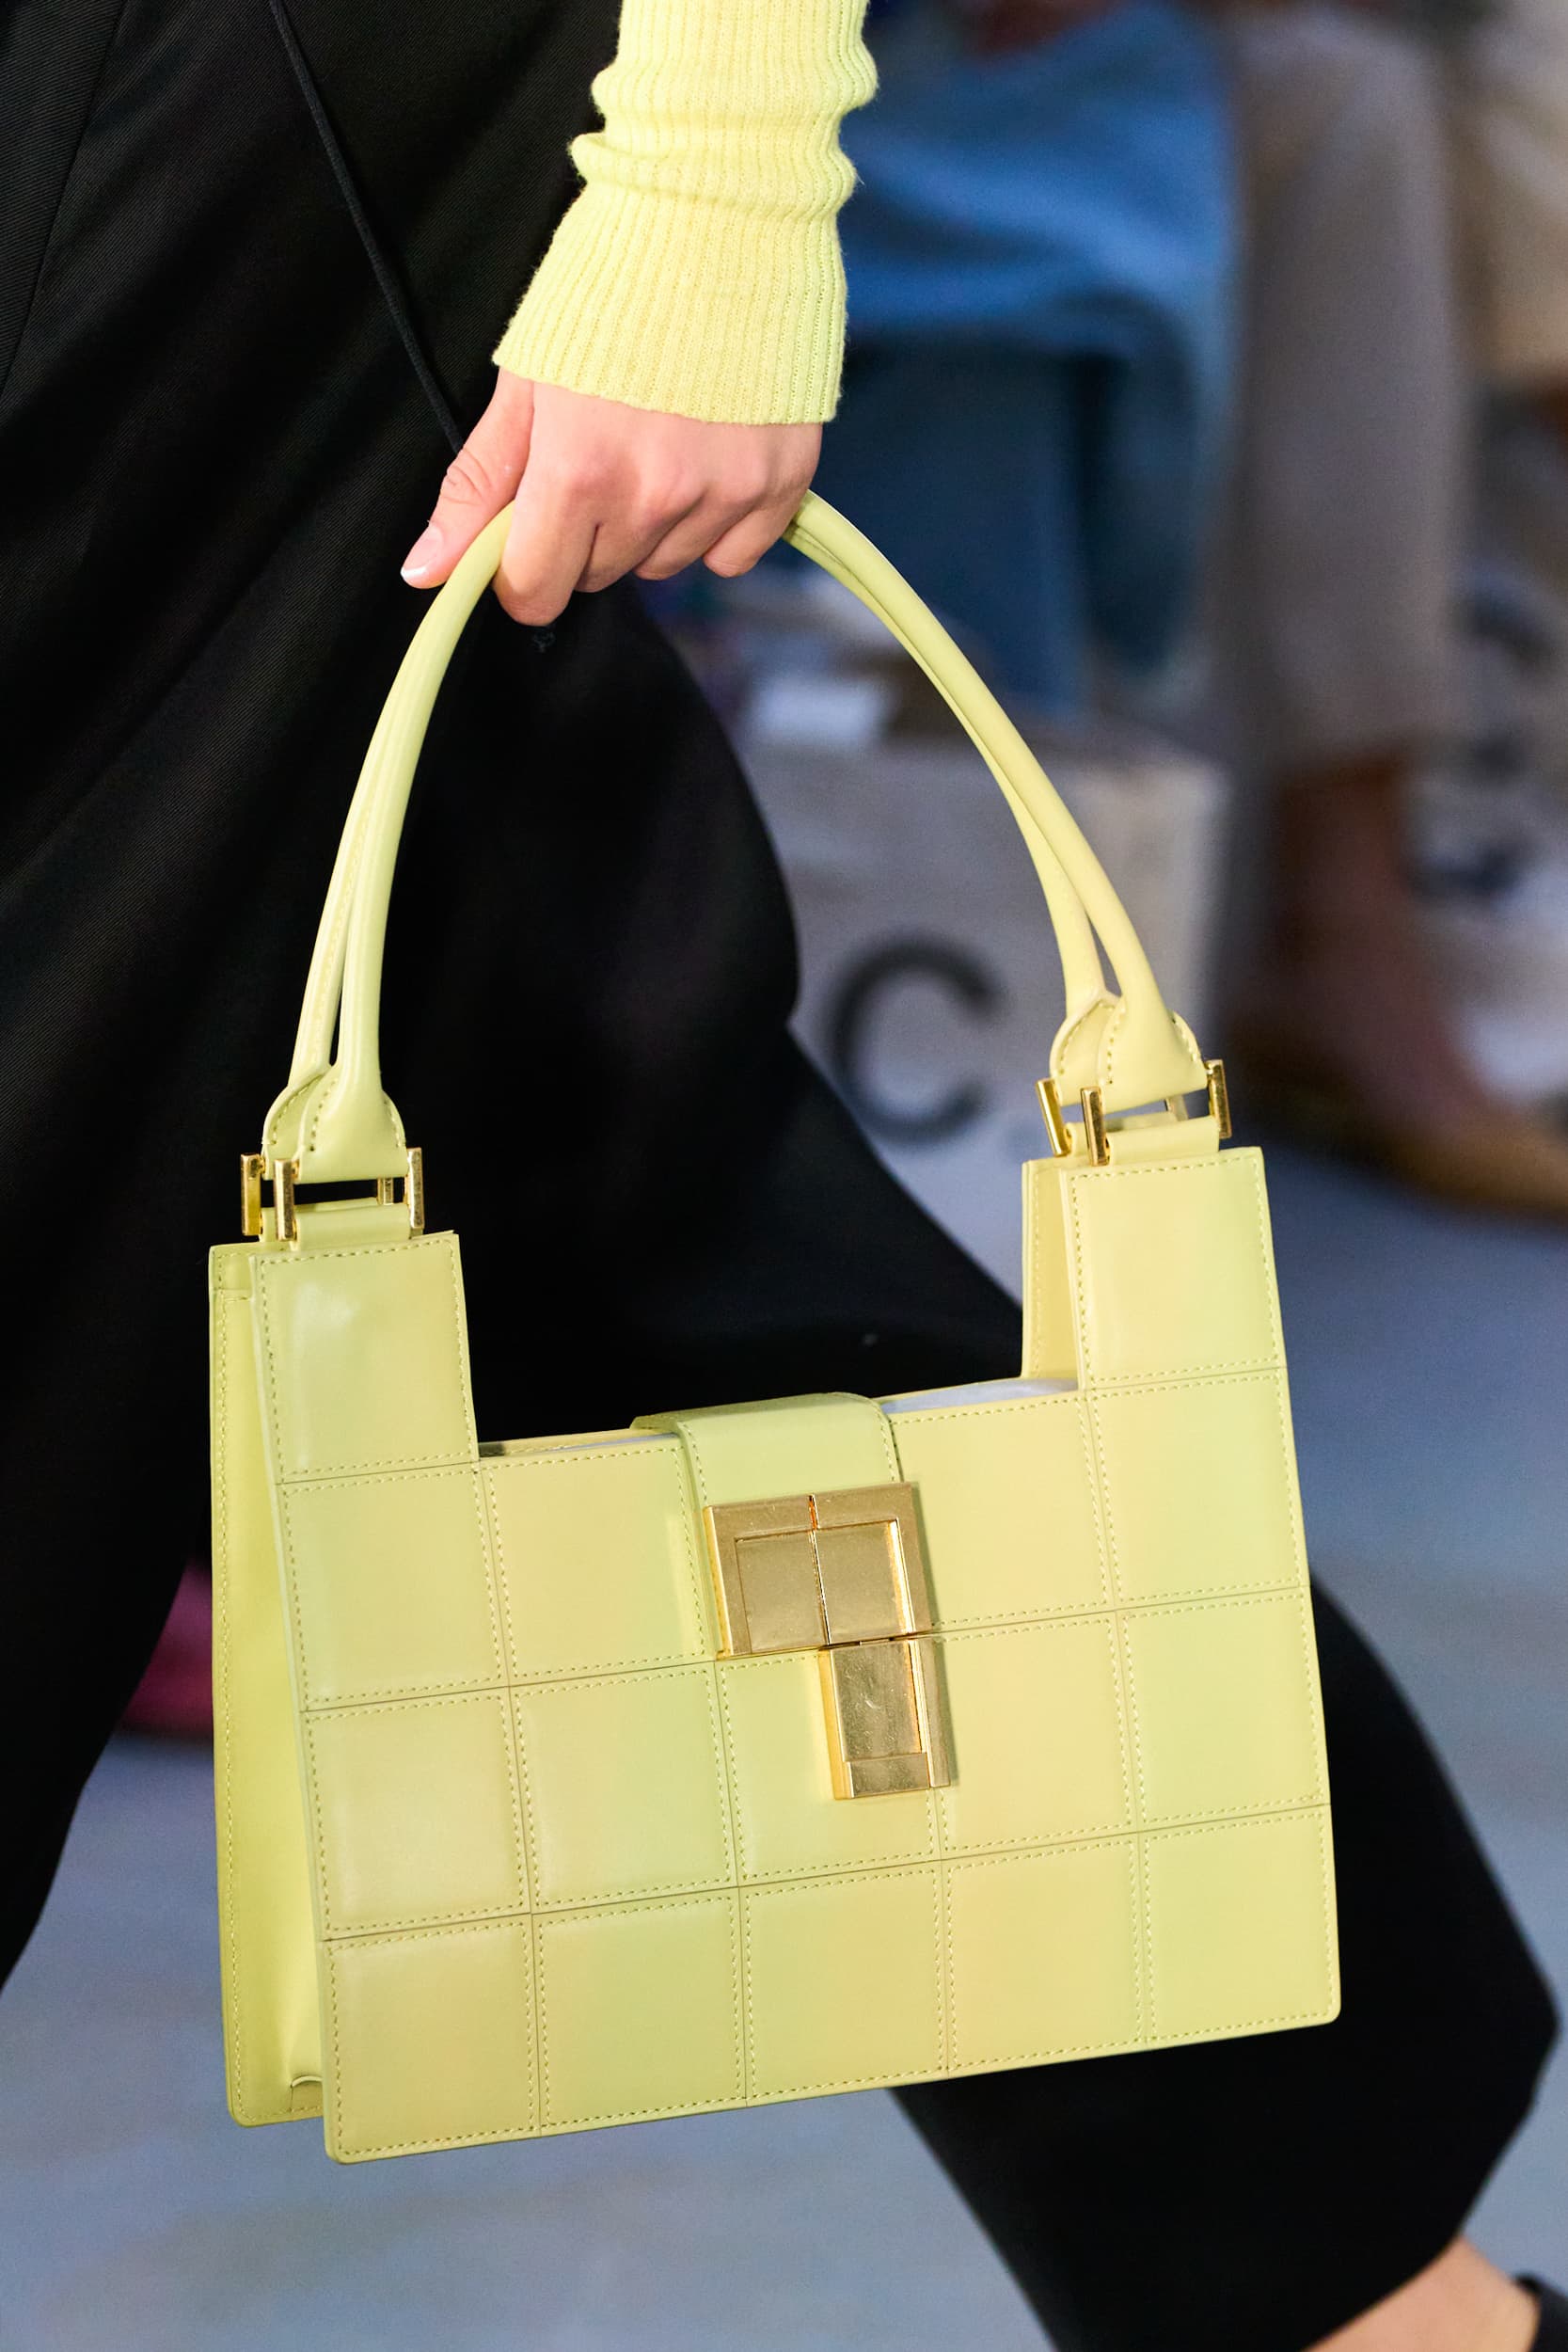 How To Wear The Cross-Body Bag — The Fashion Week Trend That Just